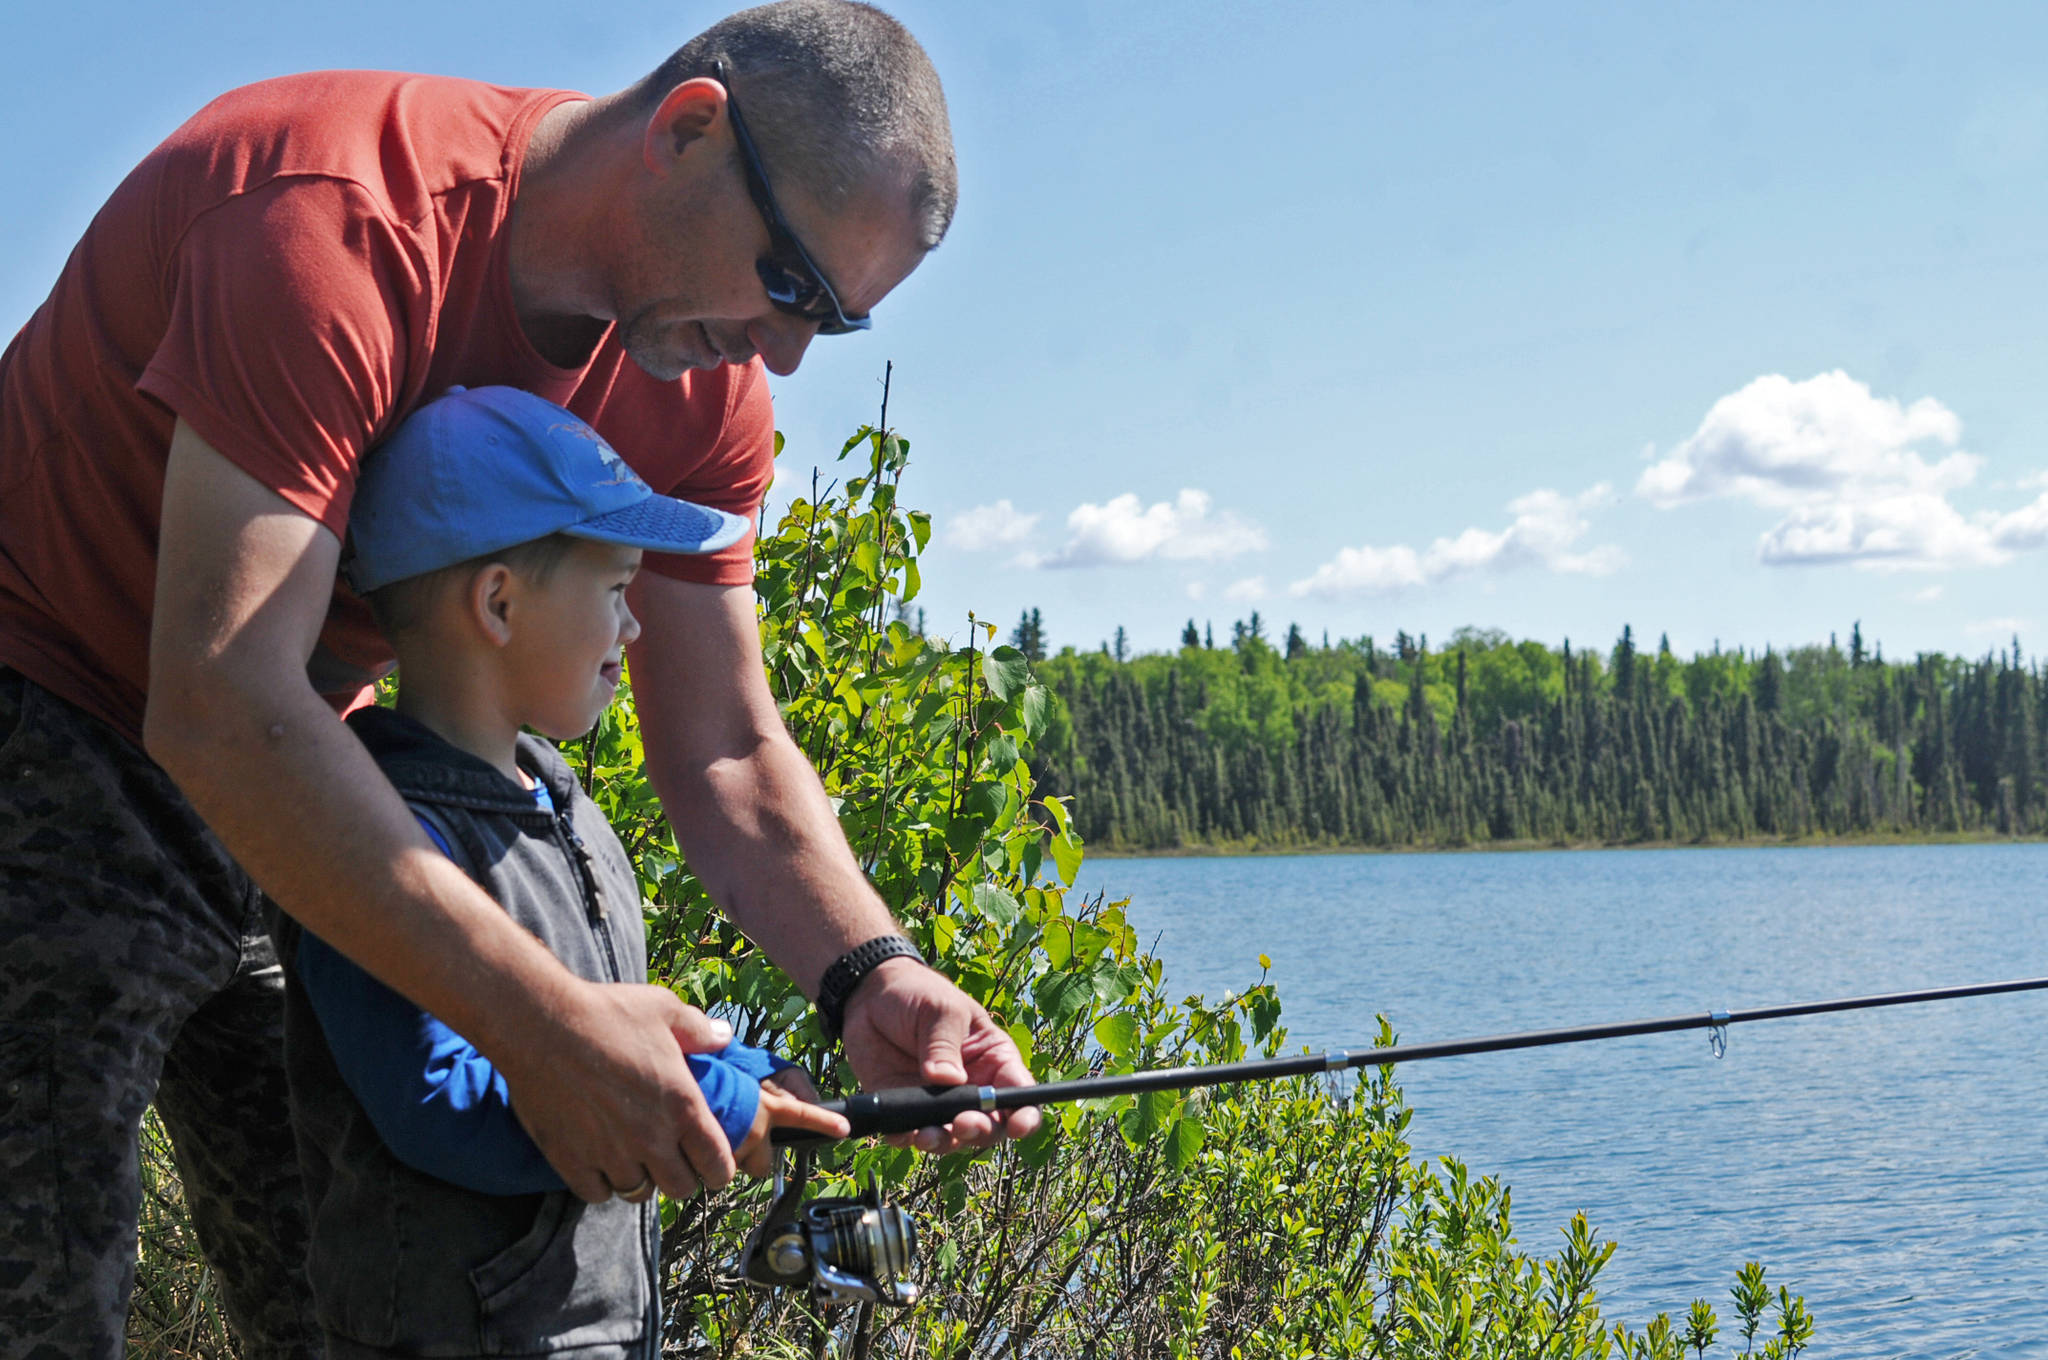 Thomas and his son Emil, visiting from Austria, try casting a line into Arc Lake on Wednesday, June 13, 2018 in Soldotna, Alaska. King salmon fishing is restricted on all the streams on the western Kenai Peninsula due to weak returns, but lake fishing and early-run sockeye fishing at the confluence of the Russian and Kenai Rivers is still available to anglers hungry to fish. (Photo by Elizabeth Earl/Peninsula Clarion)